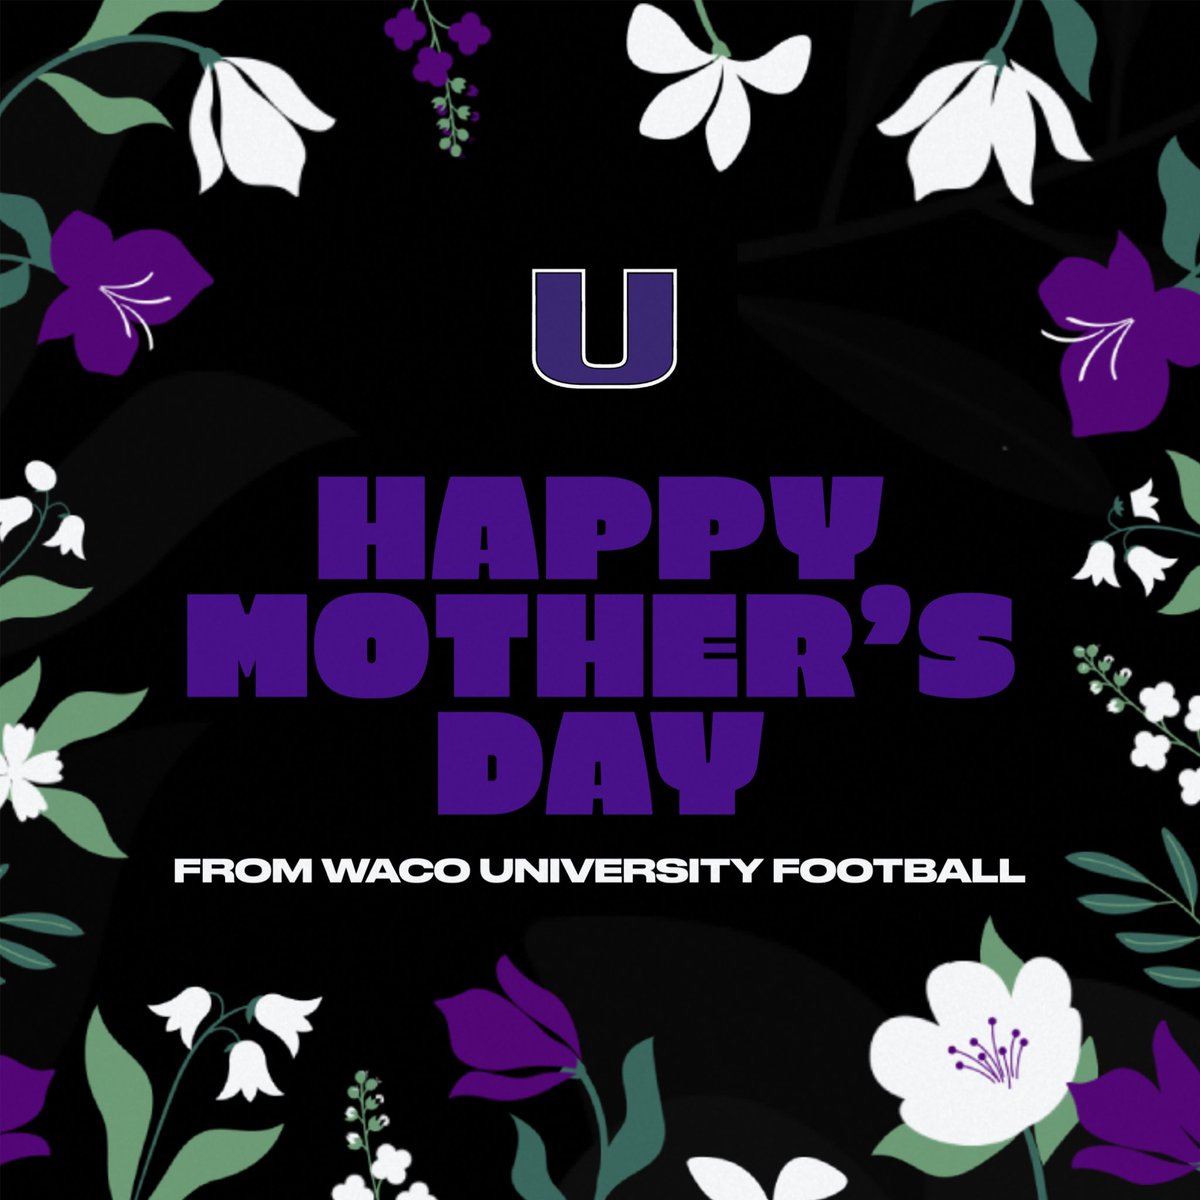 Happy Mother’s Day from THE U ‼️

#Fam1ly
#ItsAllAboutTheU🙌